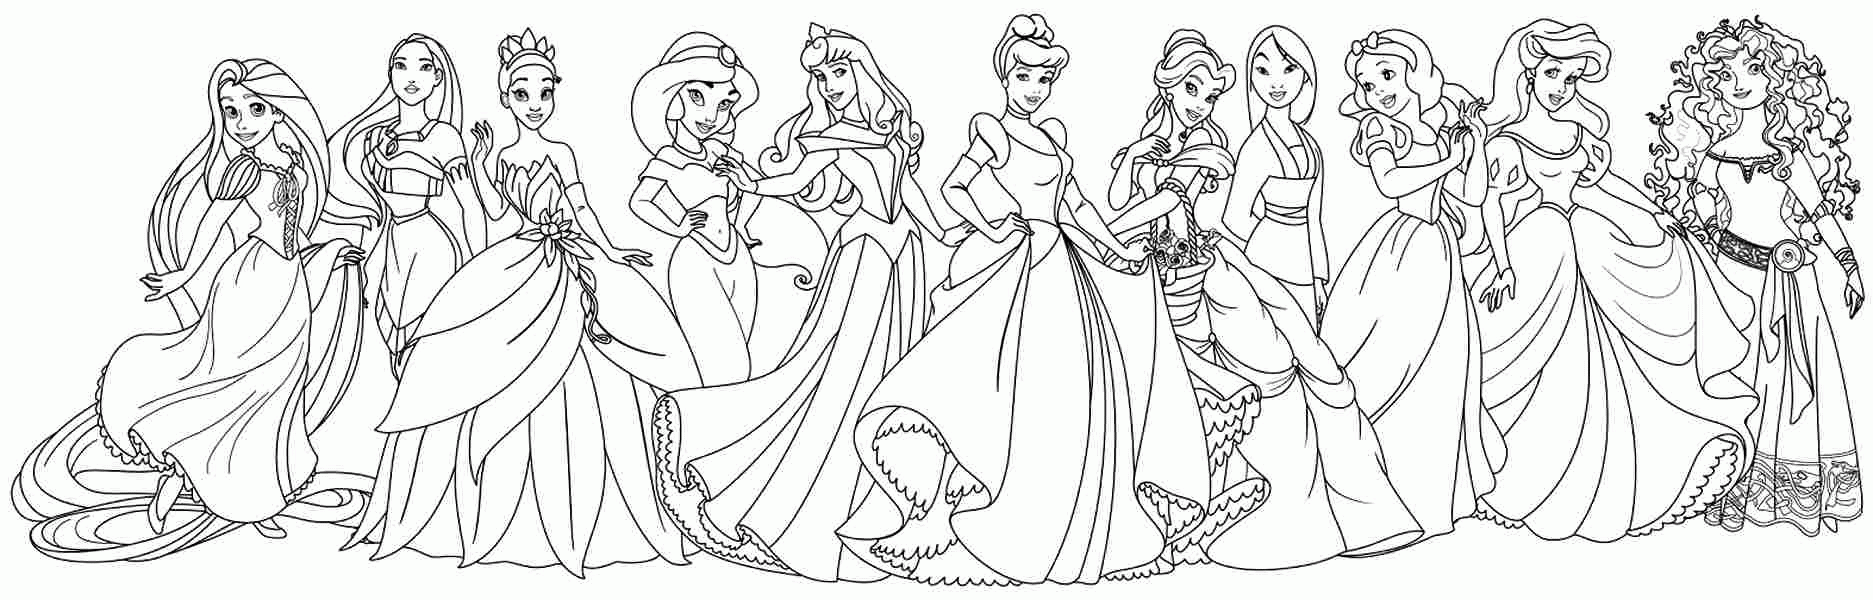 Disney Princess Free Printable Coloring Pages   Coloring Home